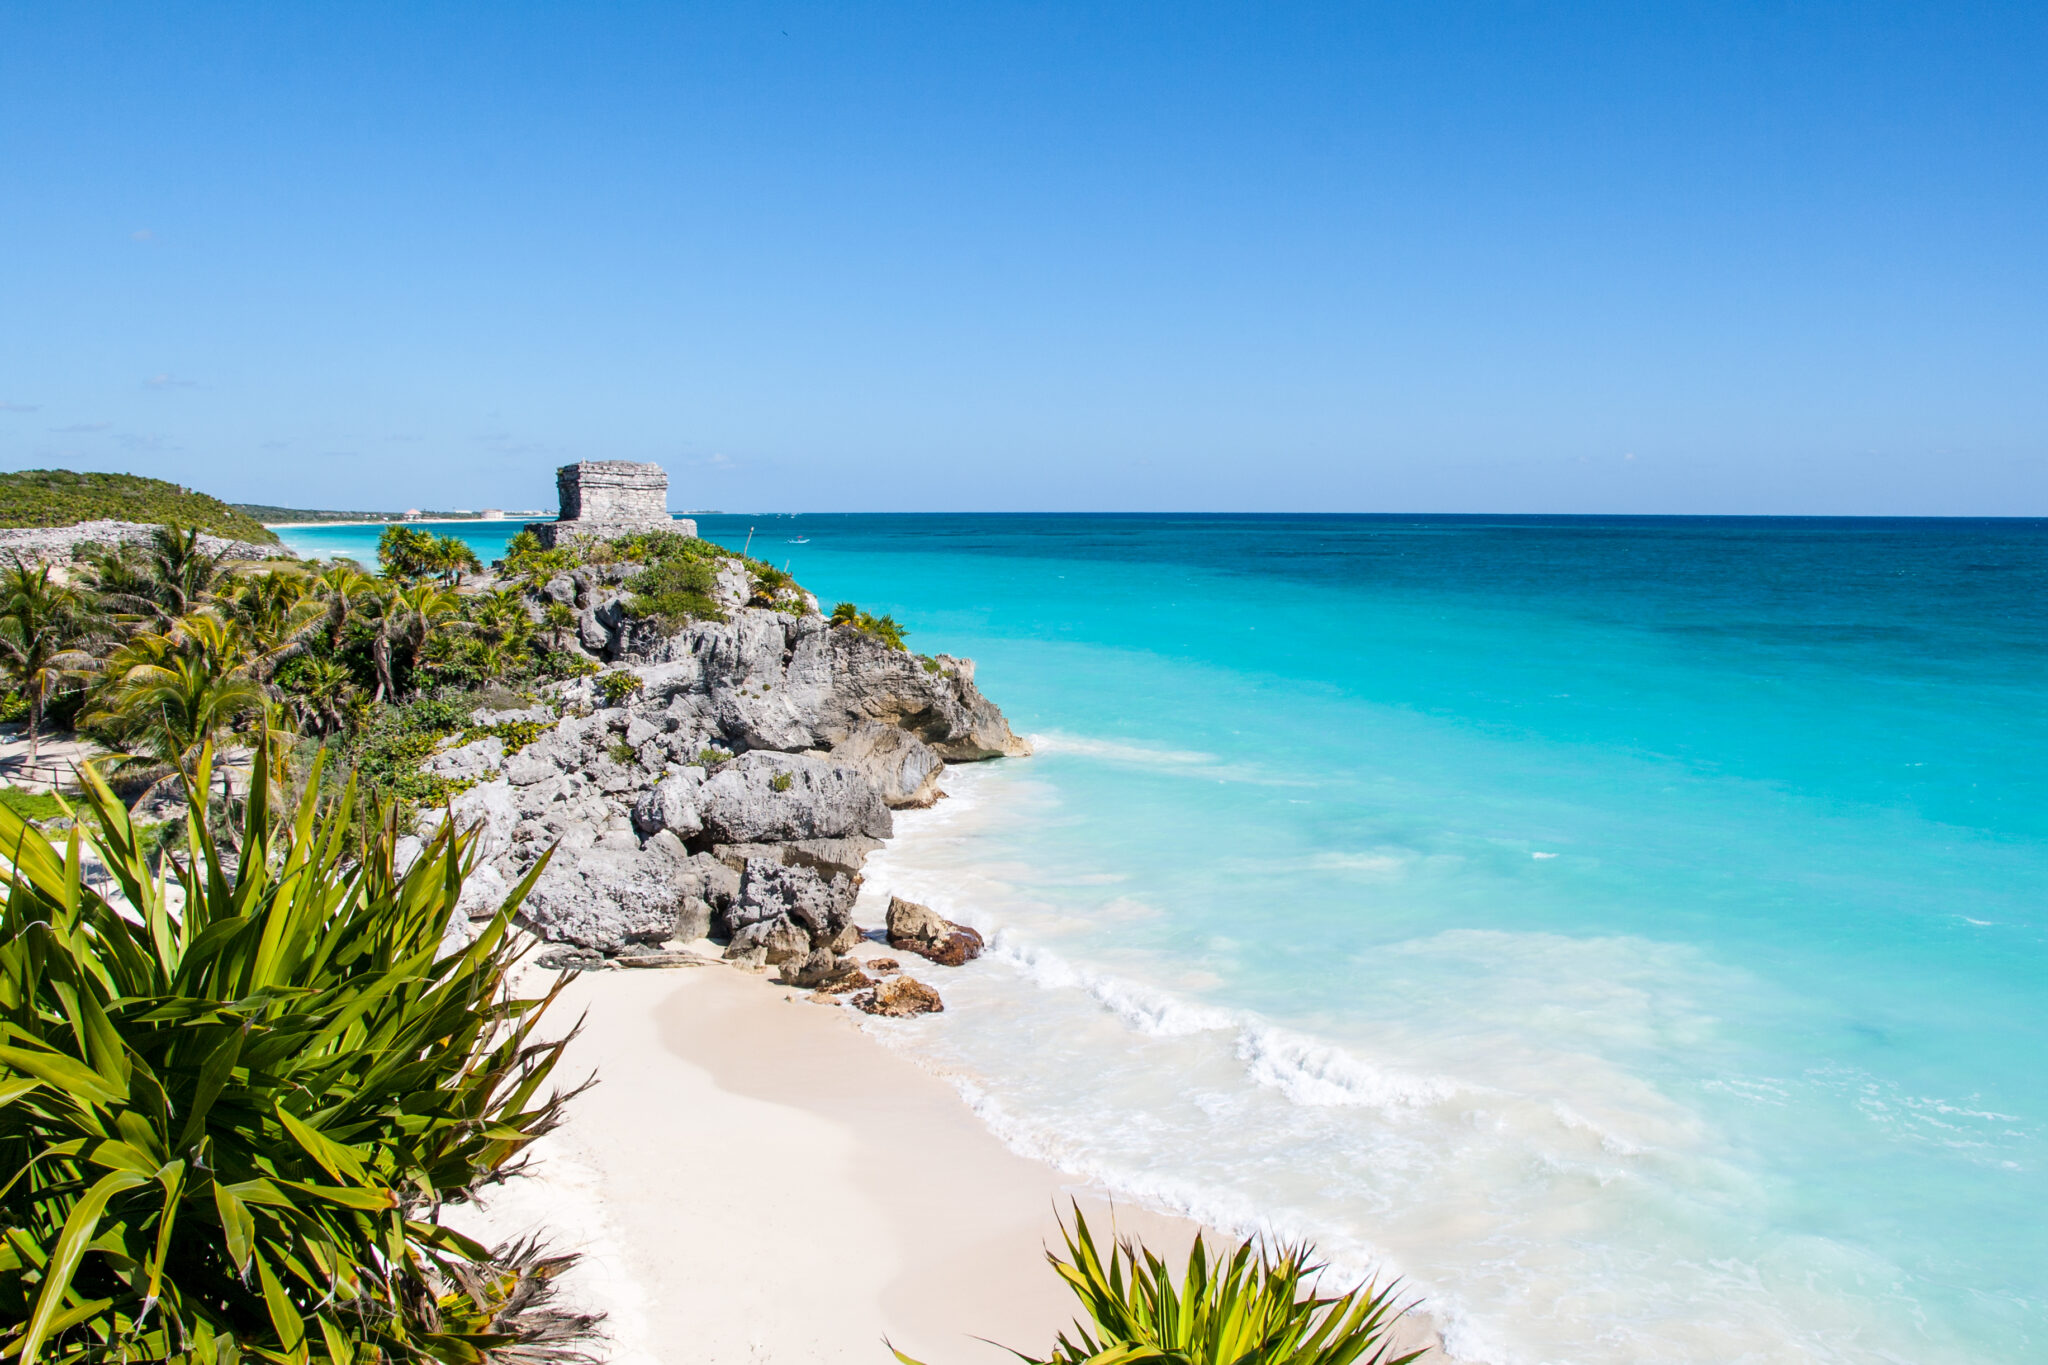 11 Reasons Why You Should Visit the Tulum Ruins